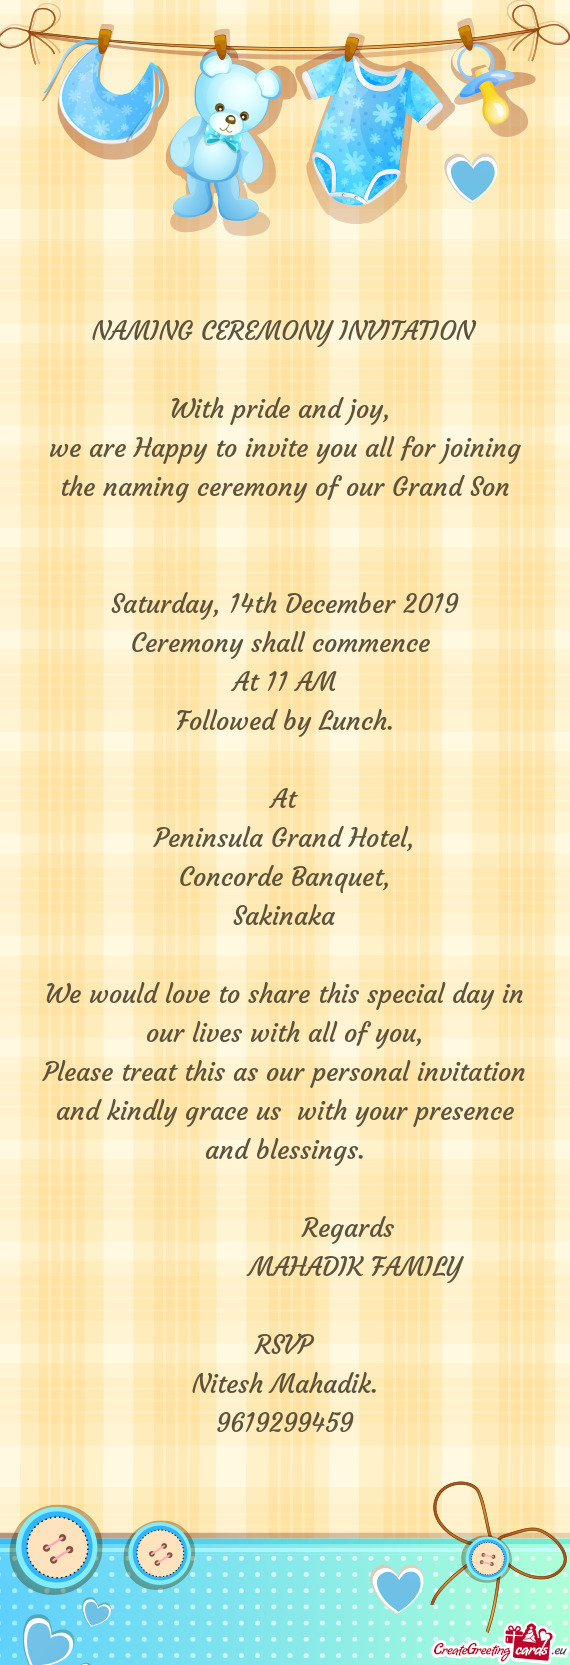 Please treat this as our personal invitation and kindly grace us with your presence and blessings